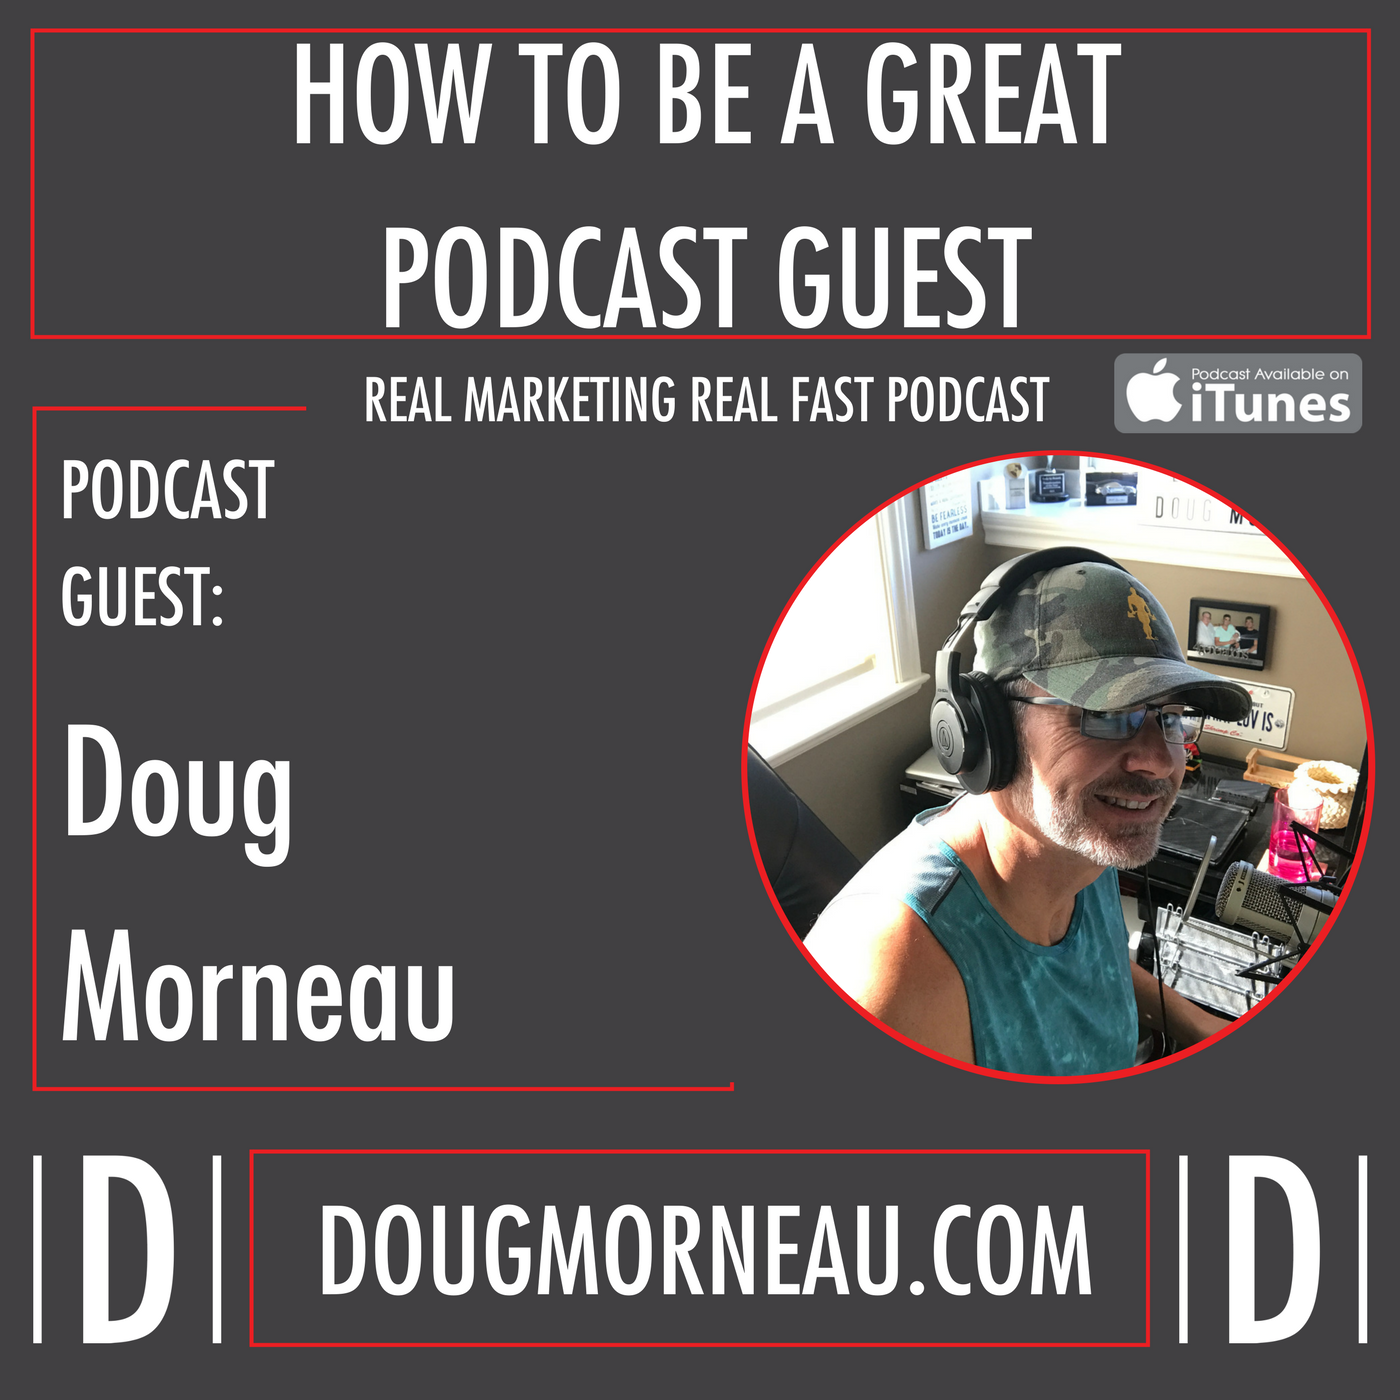 HOW TO BE A GREAT PODCAST GUEST - DOUG MORNEAU - REAL MARKETING REAL FAST PODCAST